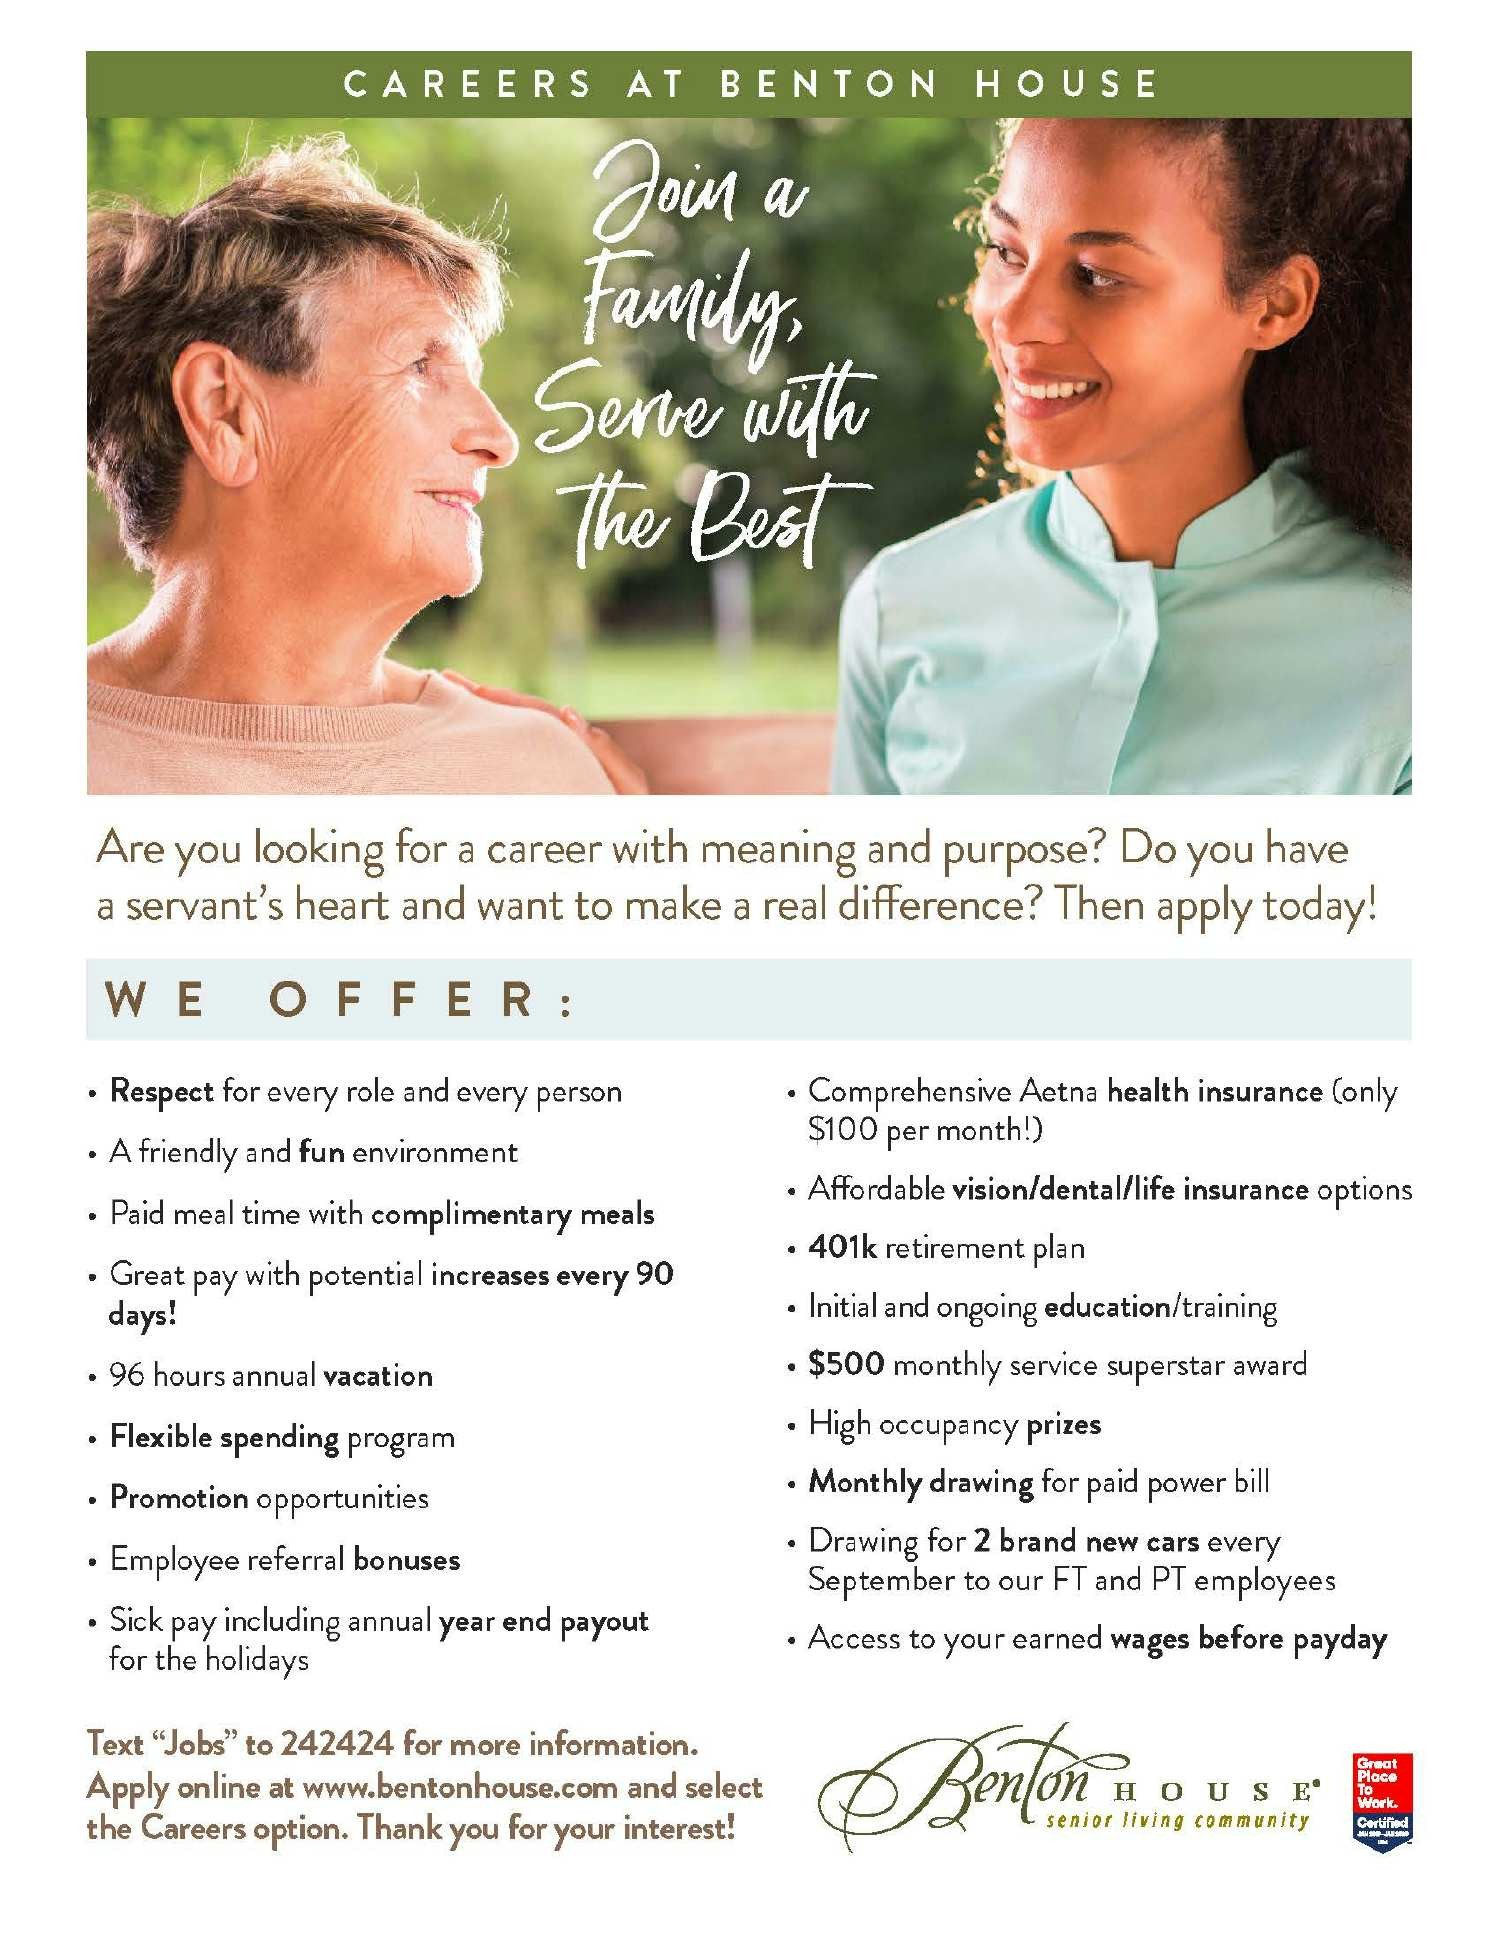 Please check out some of the attractive benefits we have for our wonderful Team Members!